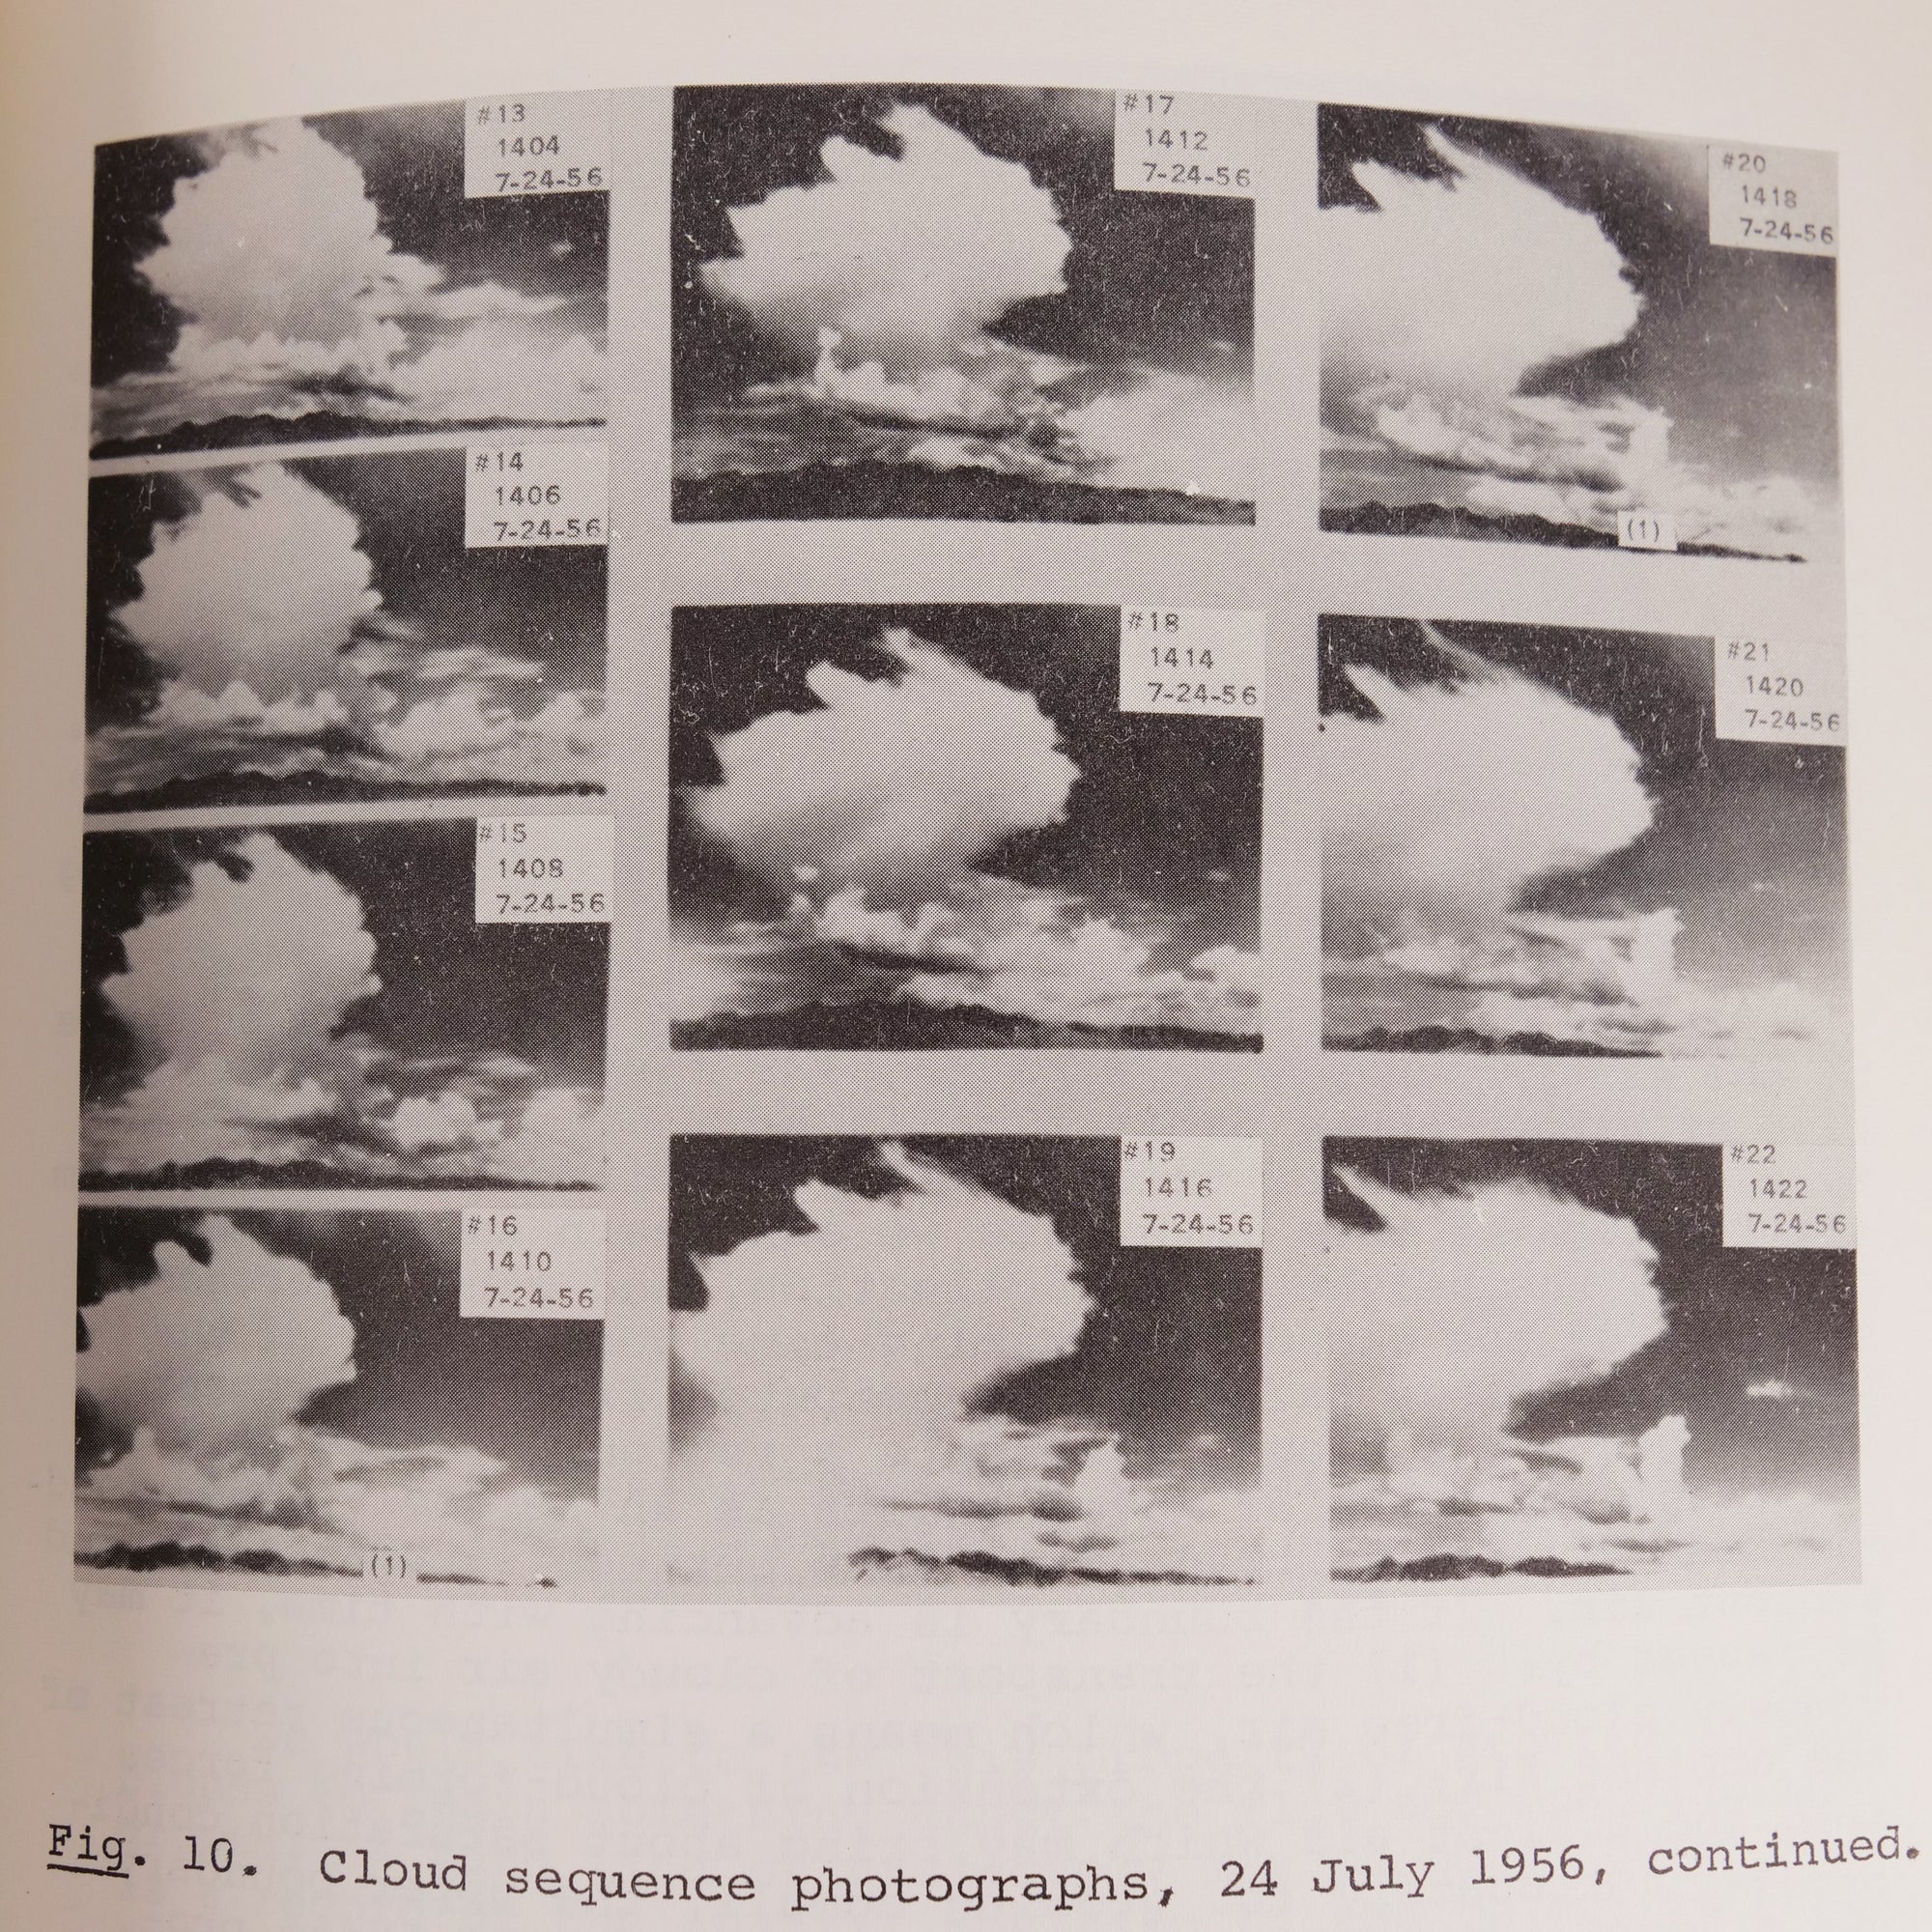 Studying Storms: Meteorologist Charles E. Anderson's Dissertation on Cumulus Clouds